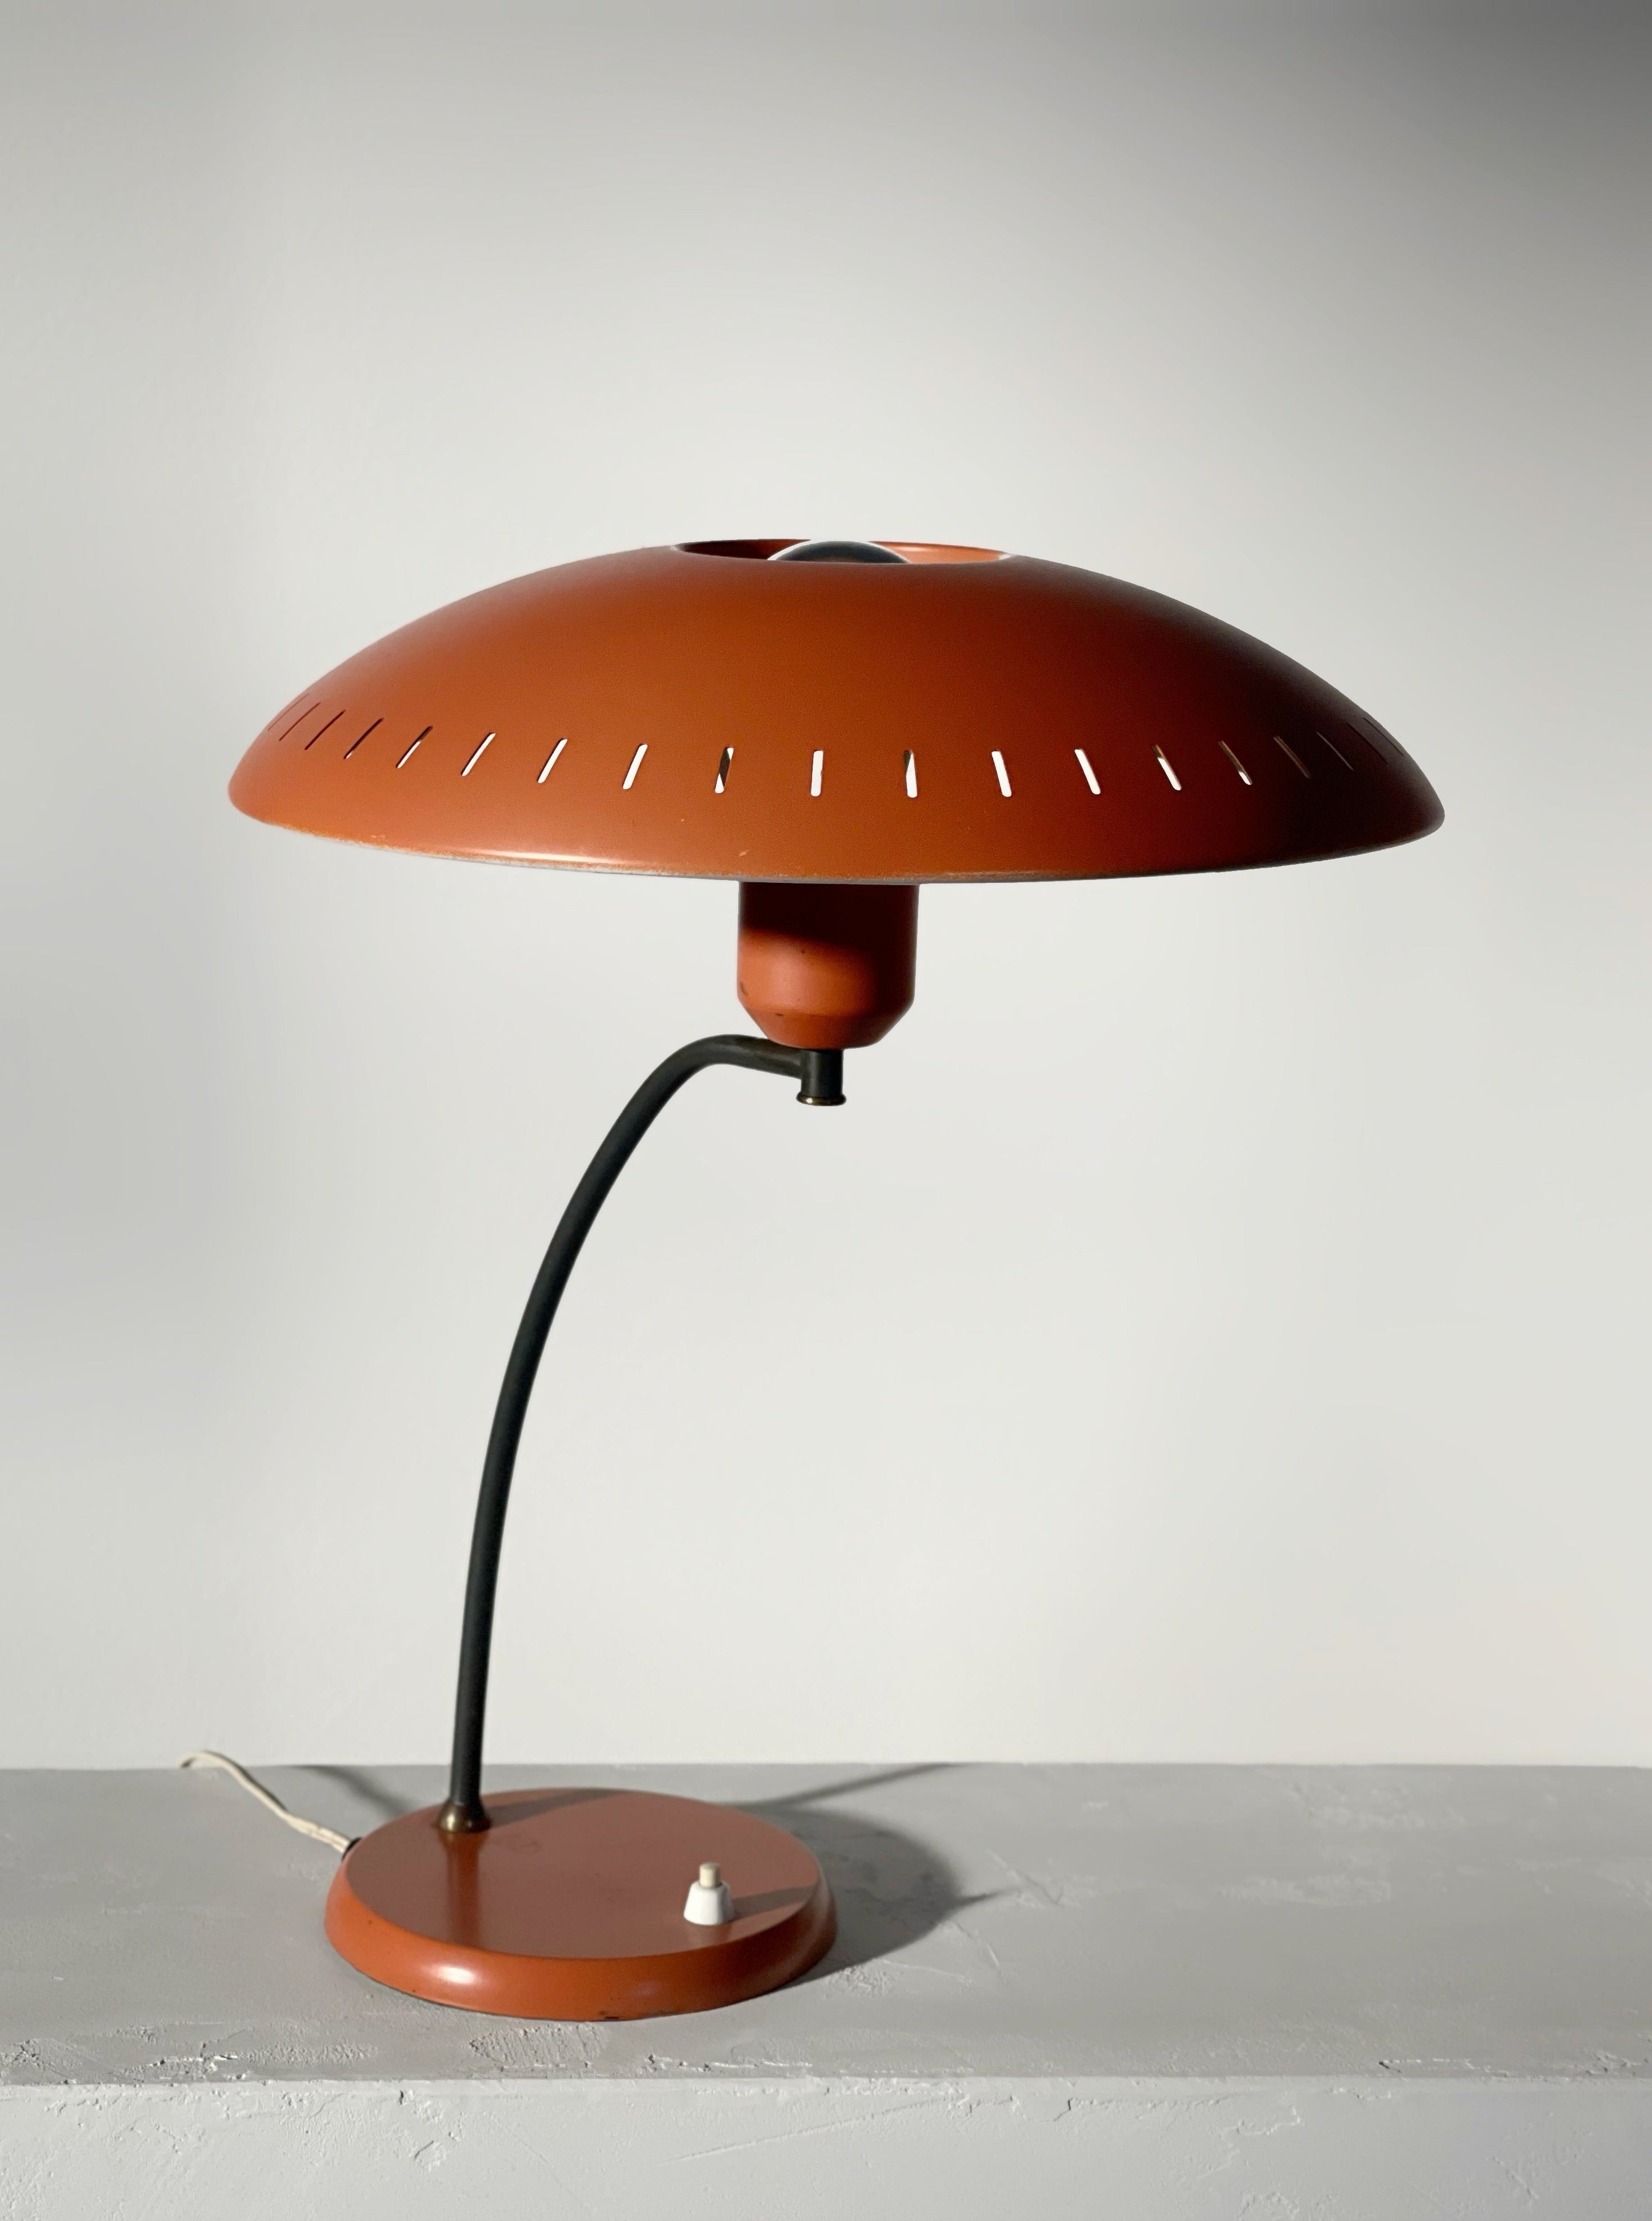 'Junior' Desk Lamp by Louis Kalff for Philips, 1960s - 70s